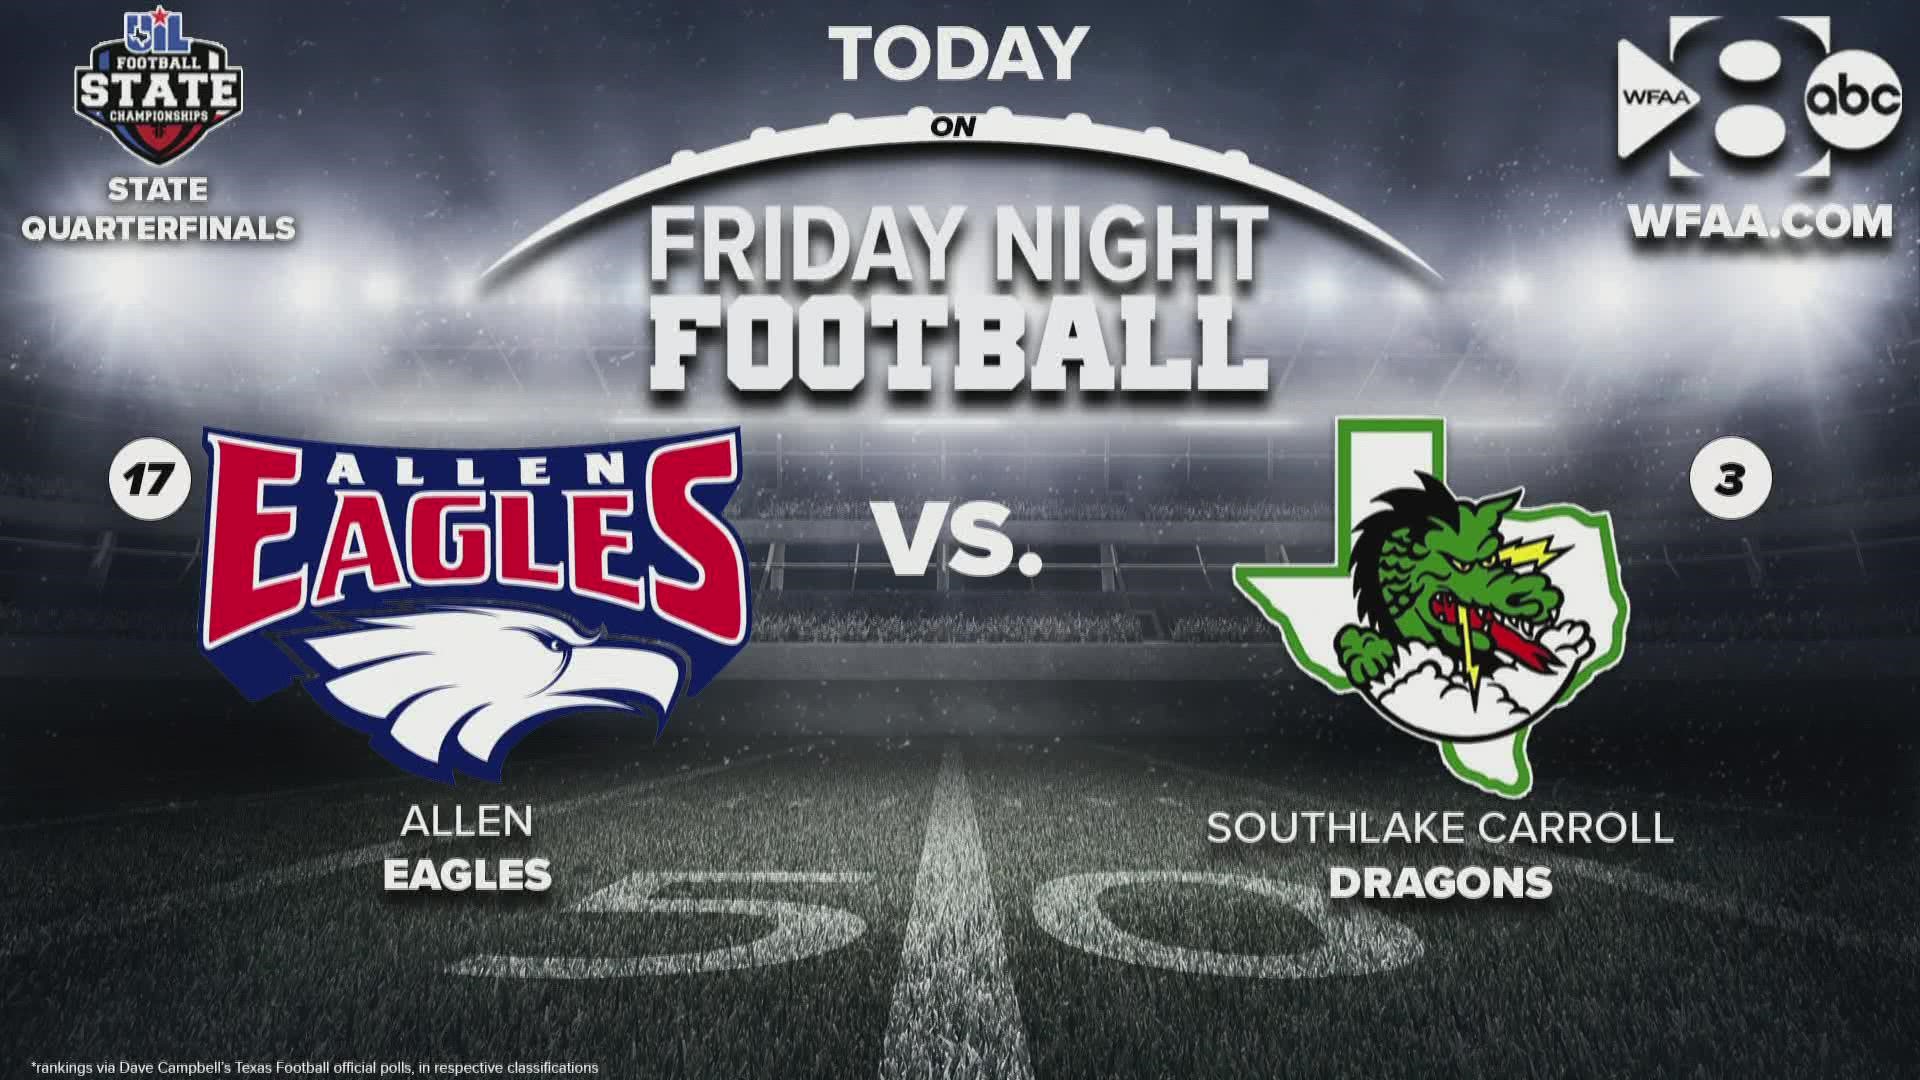 17th-ranked Allen faced 3rd-ranked Southlake Carroll at UNT's Apogee Stadium.